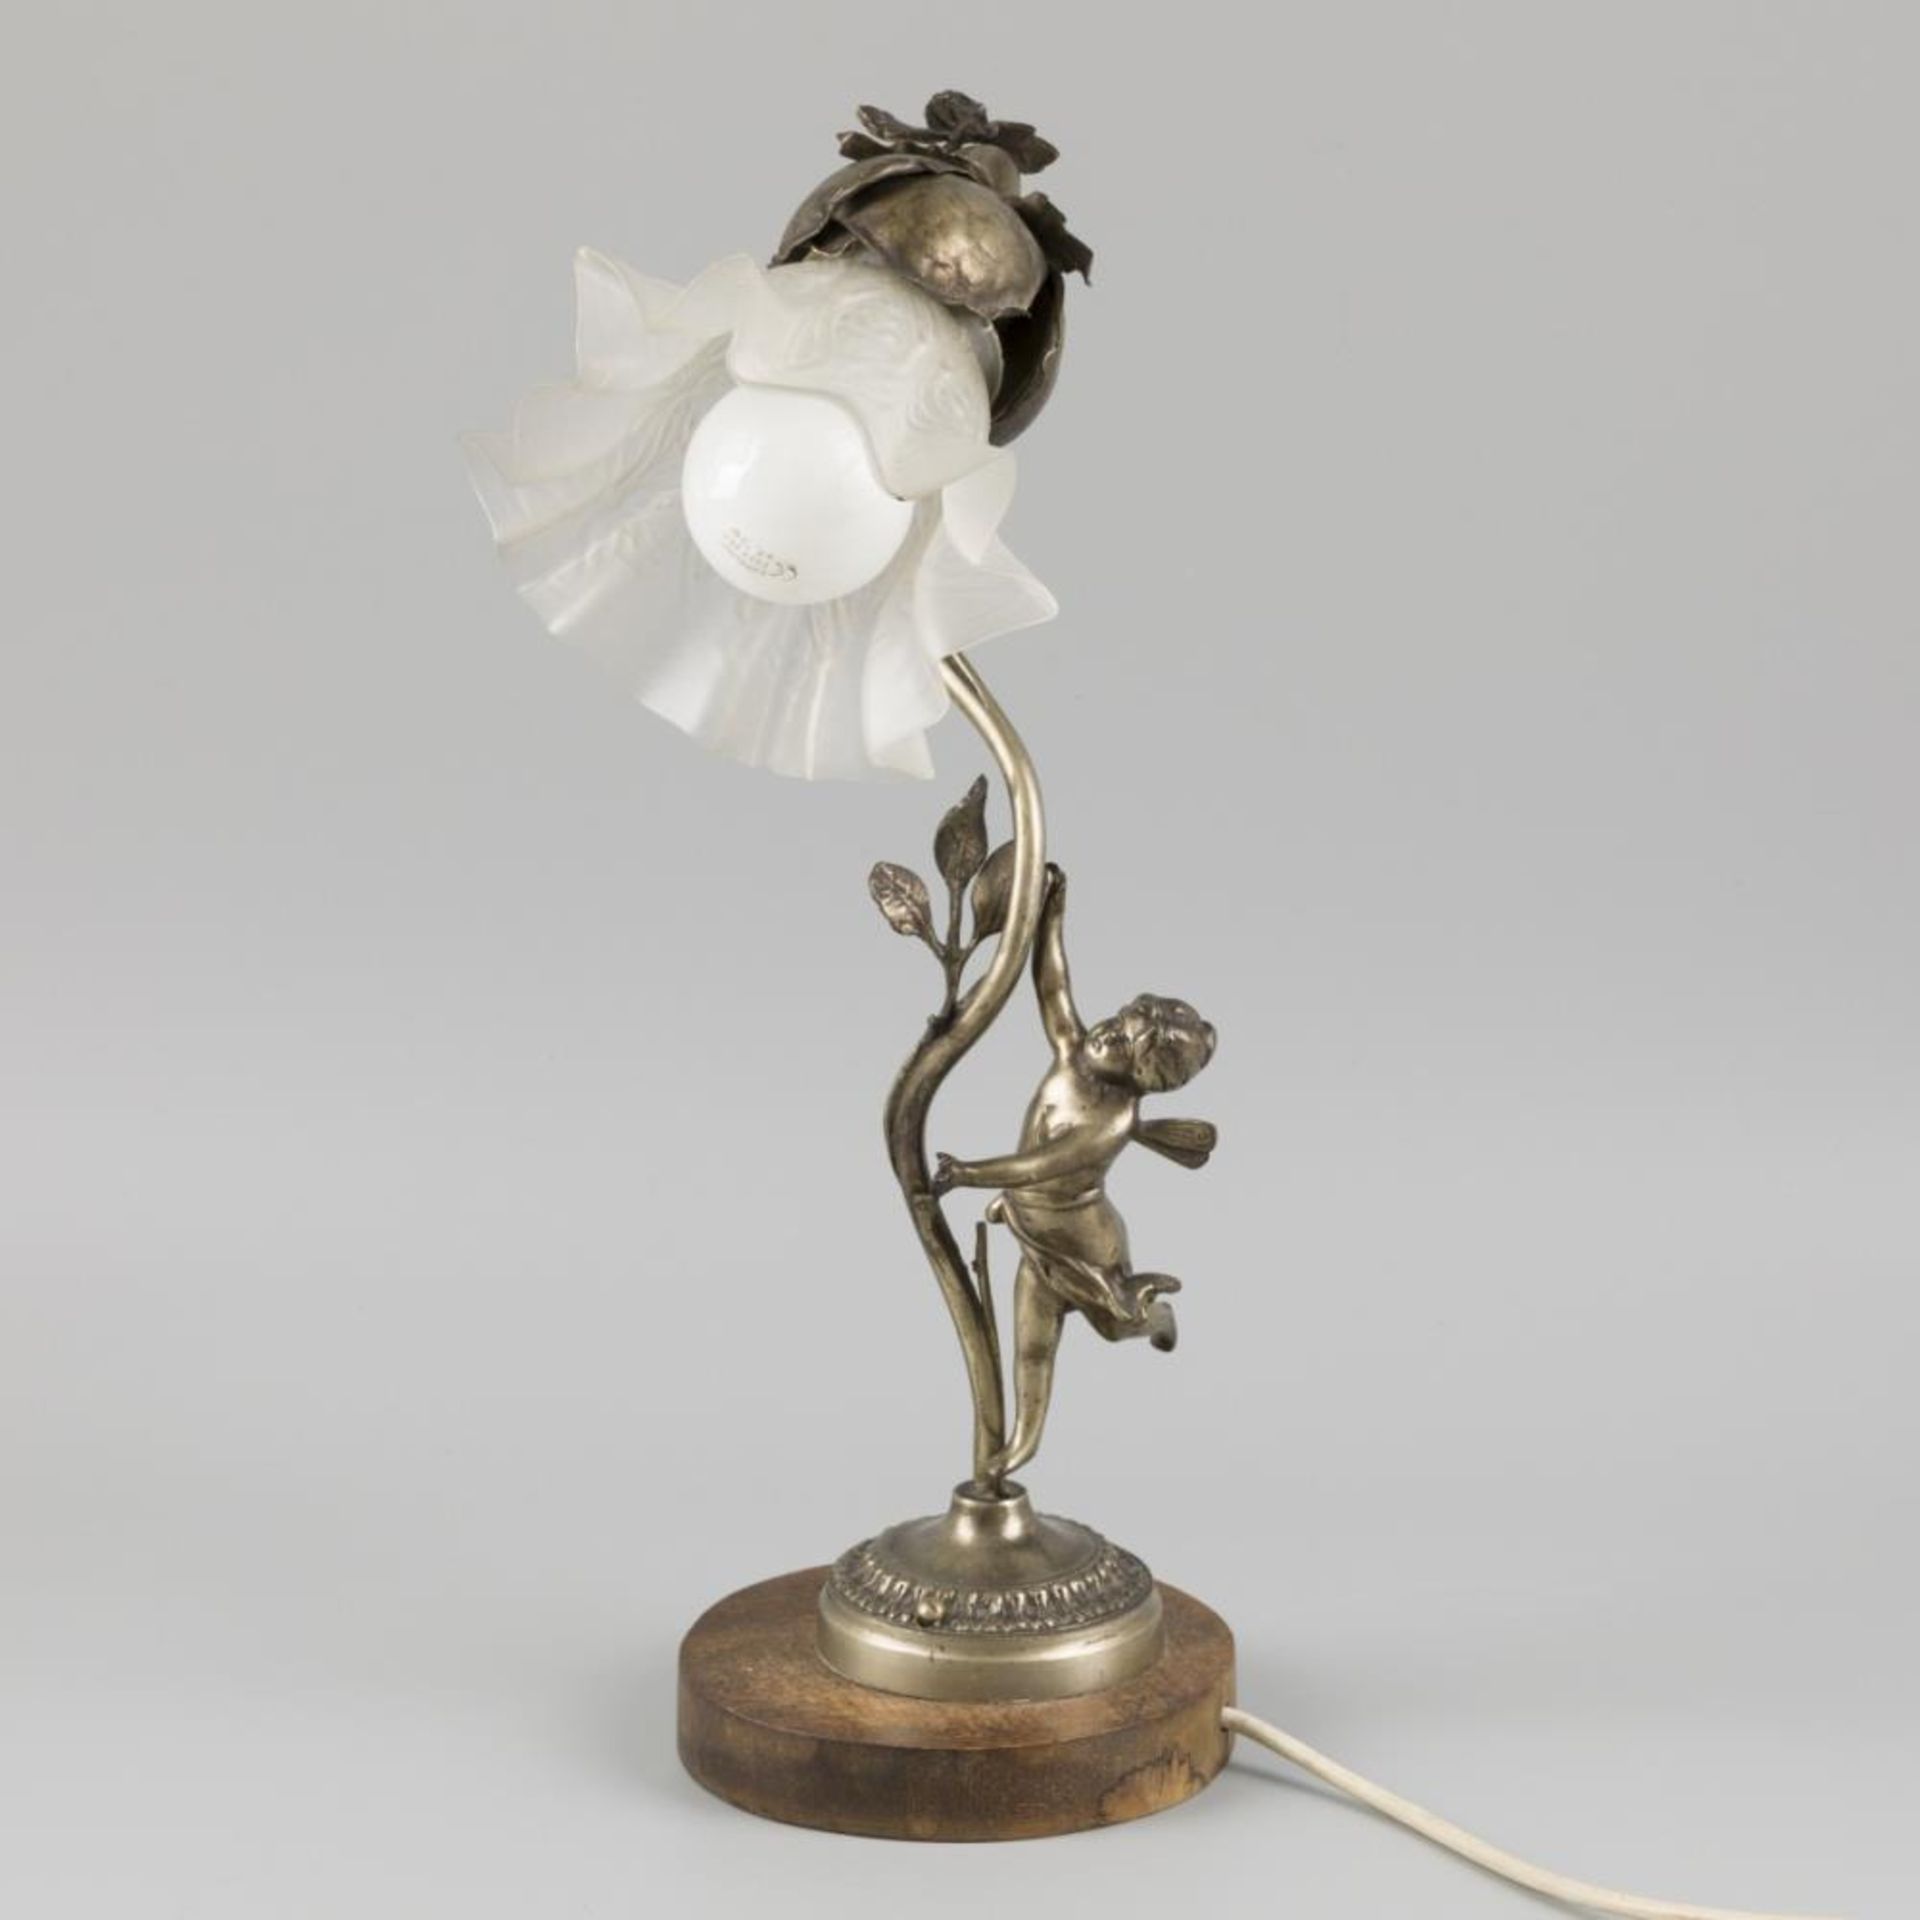 A metal table lamp shaped as a flower on a stem, 20th century.